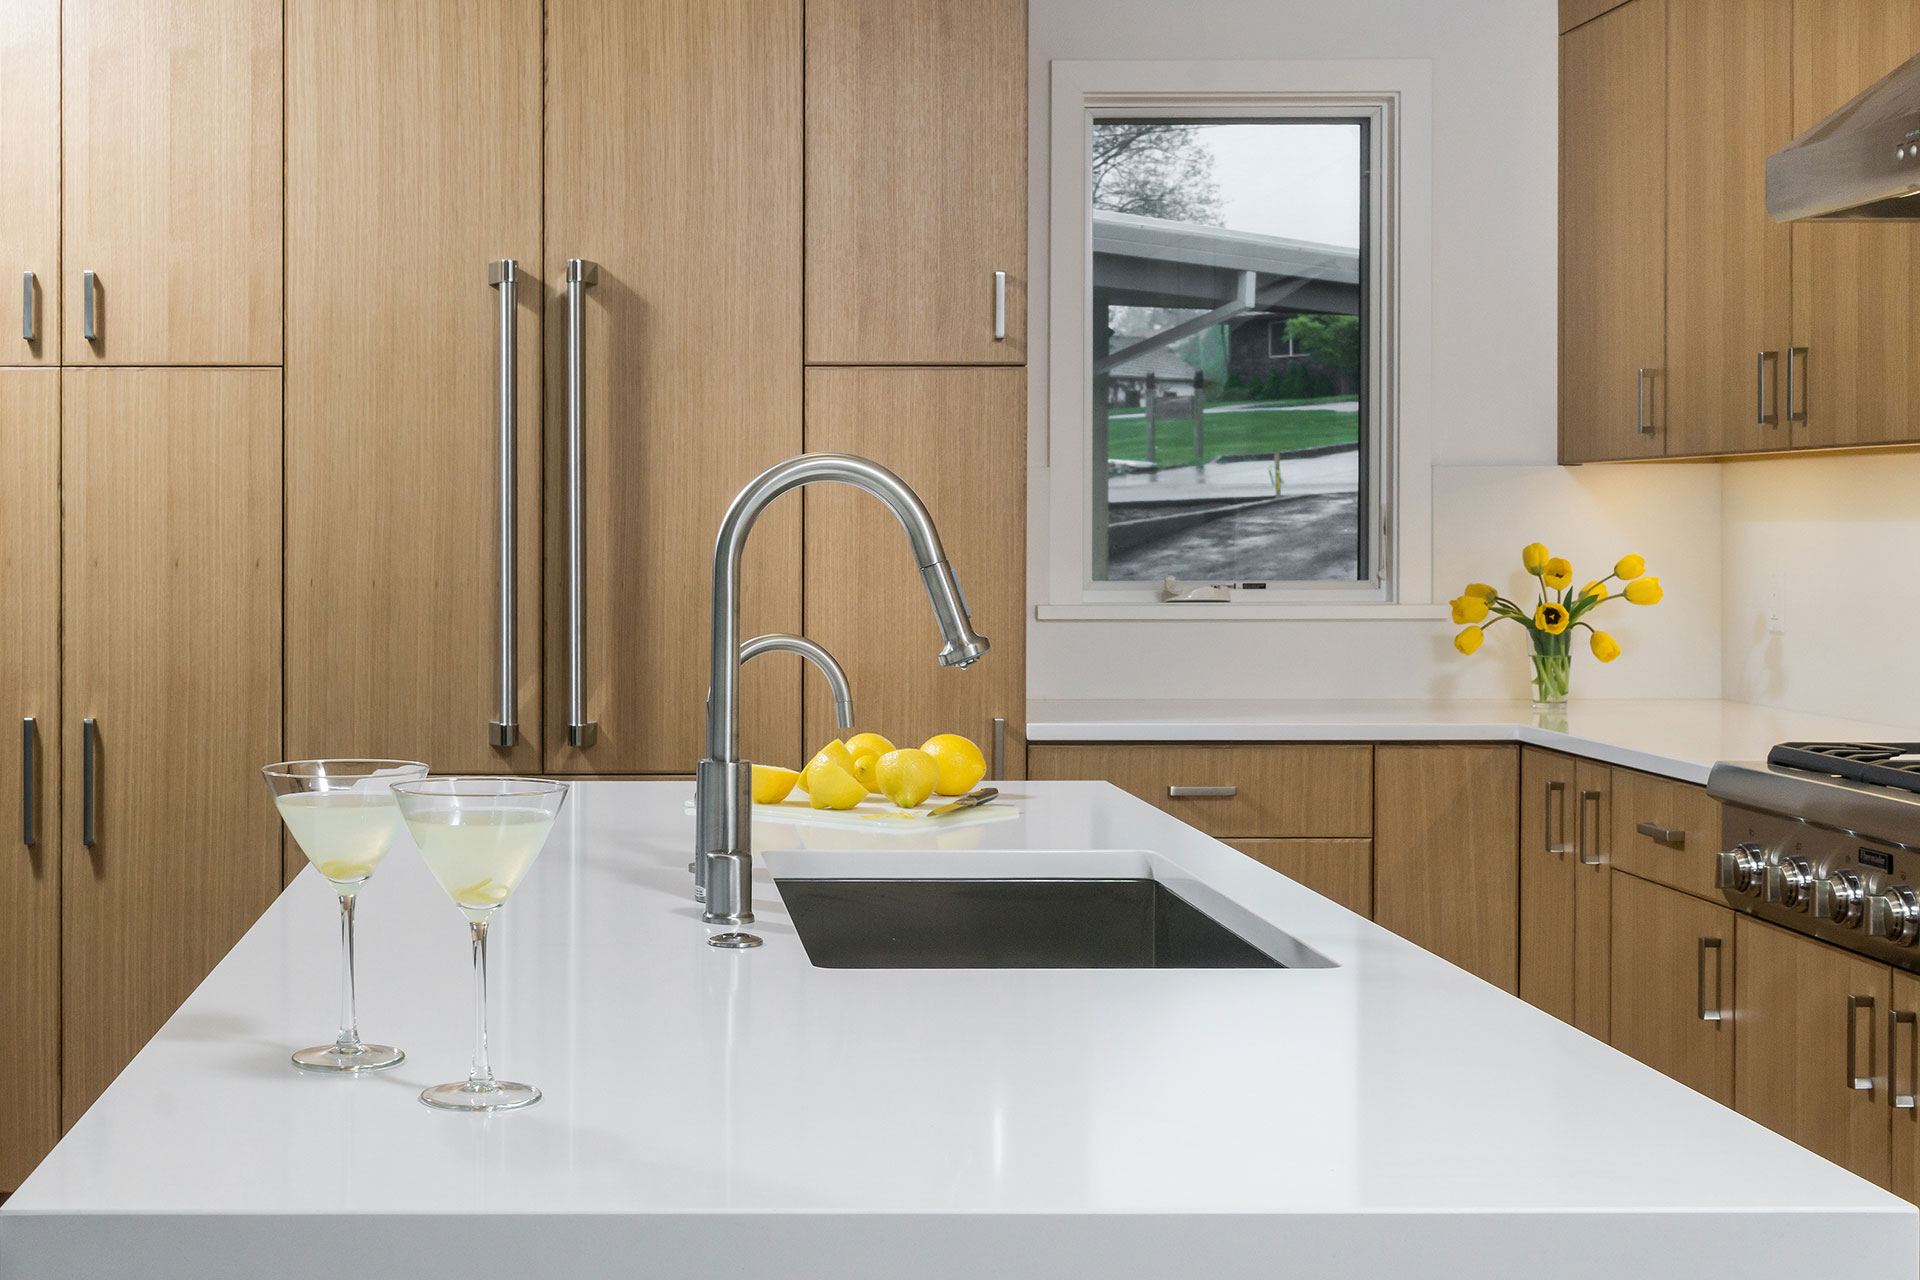 The kitchen island is made of white quartz and features a waterfall edge.